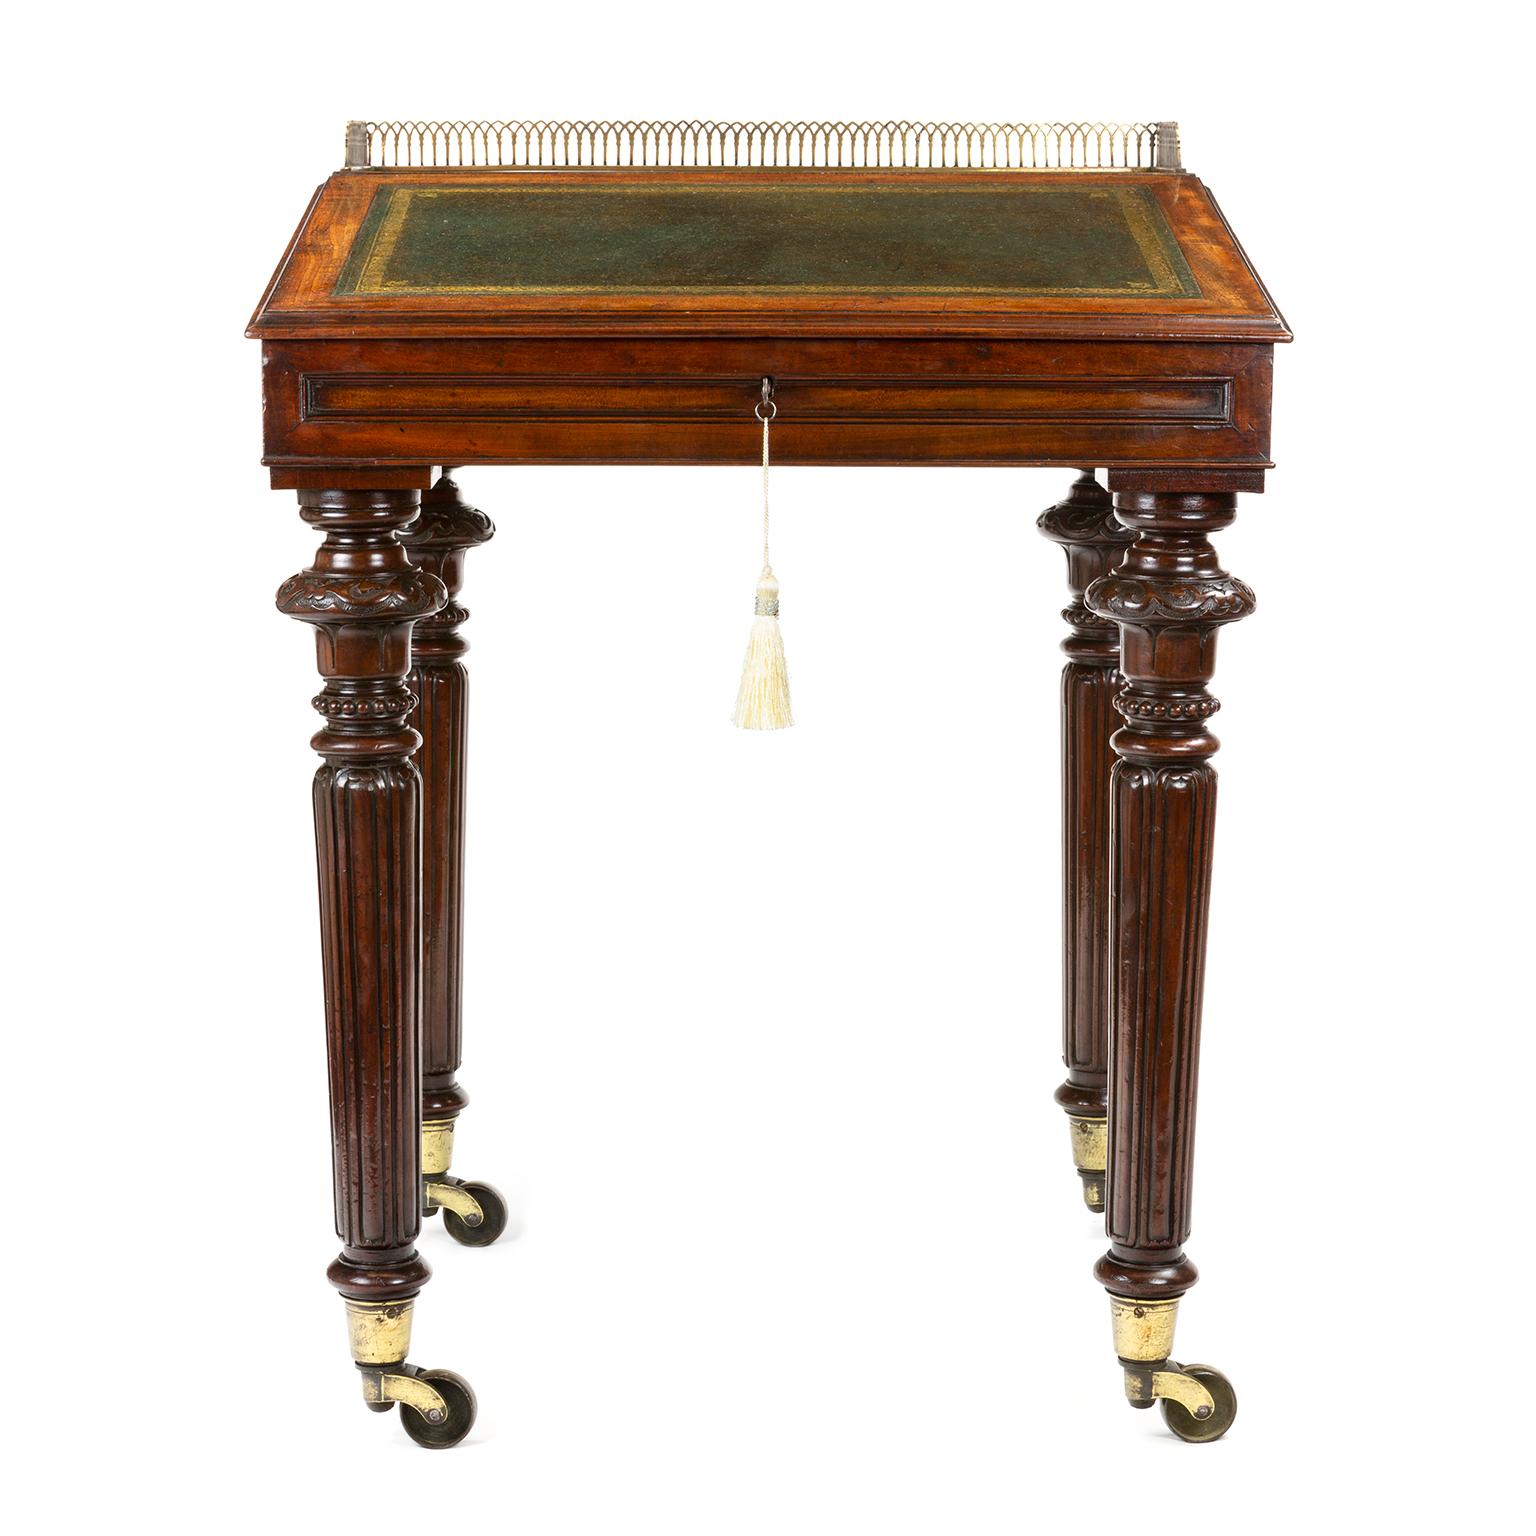 A Regency clerks estate writing desk, in mahogany, attributed to Gillows of Lancaster.

Gillows of Lancaster and London, also known as Gillow & Co., was an English furniture making firm based in Lancaster, Lancashire, and in London. It was founded